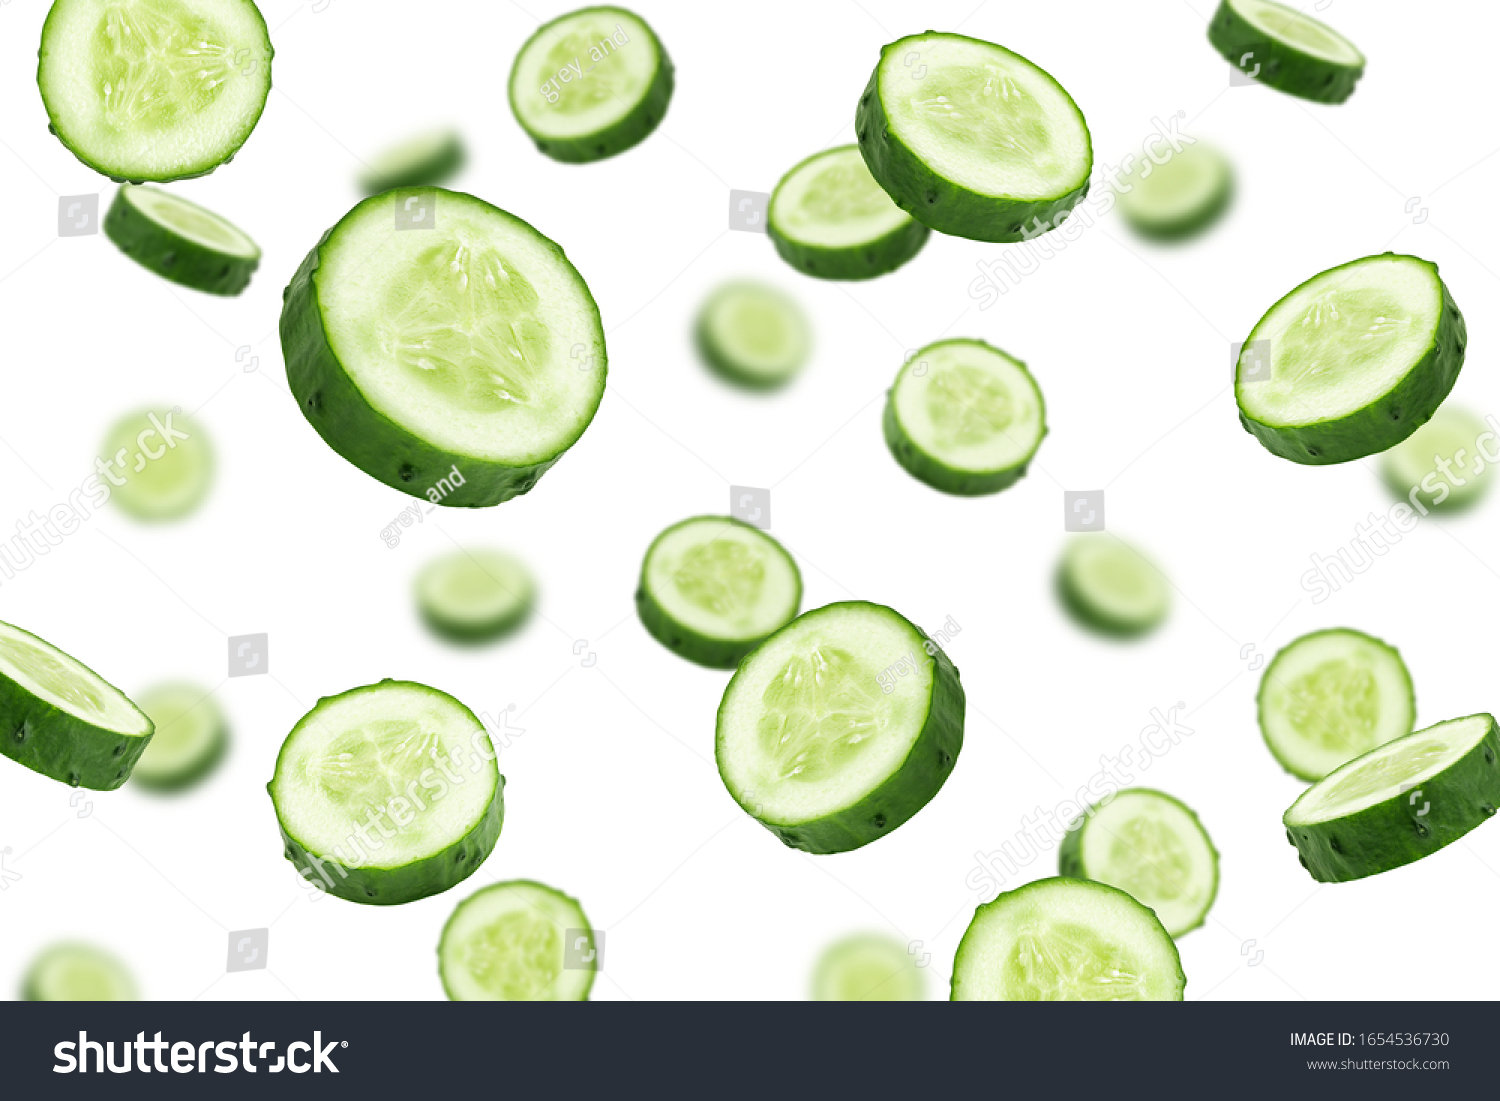 Falling cucumber slice isolated on white background, selective focus #1654536730